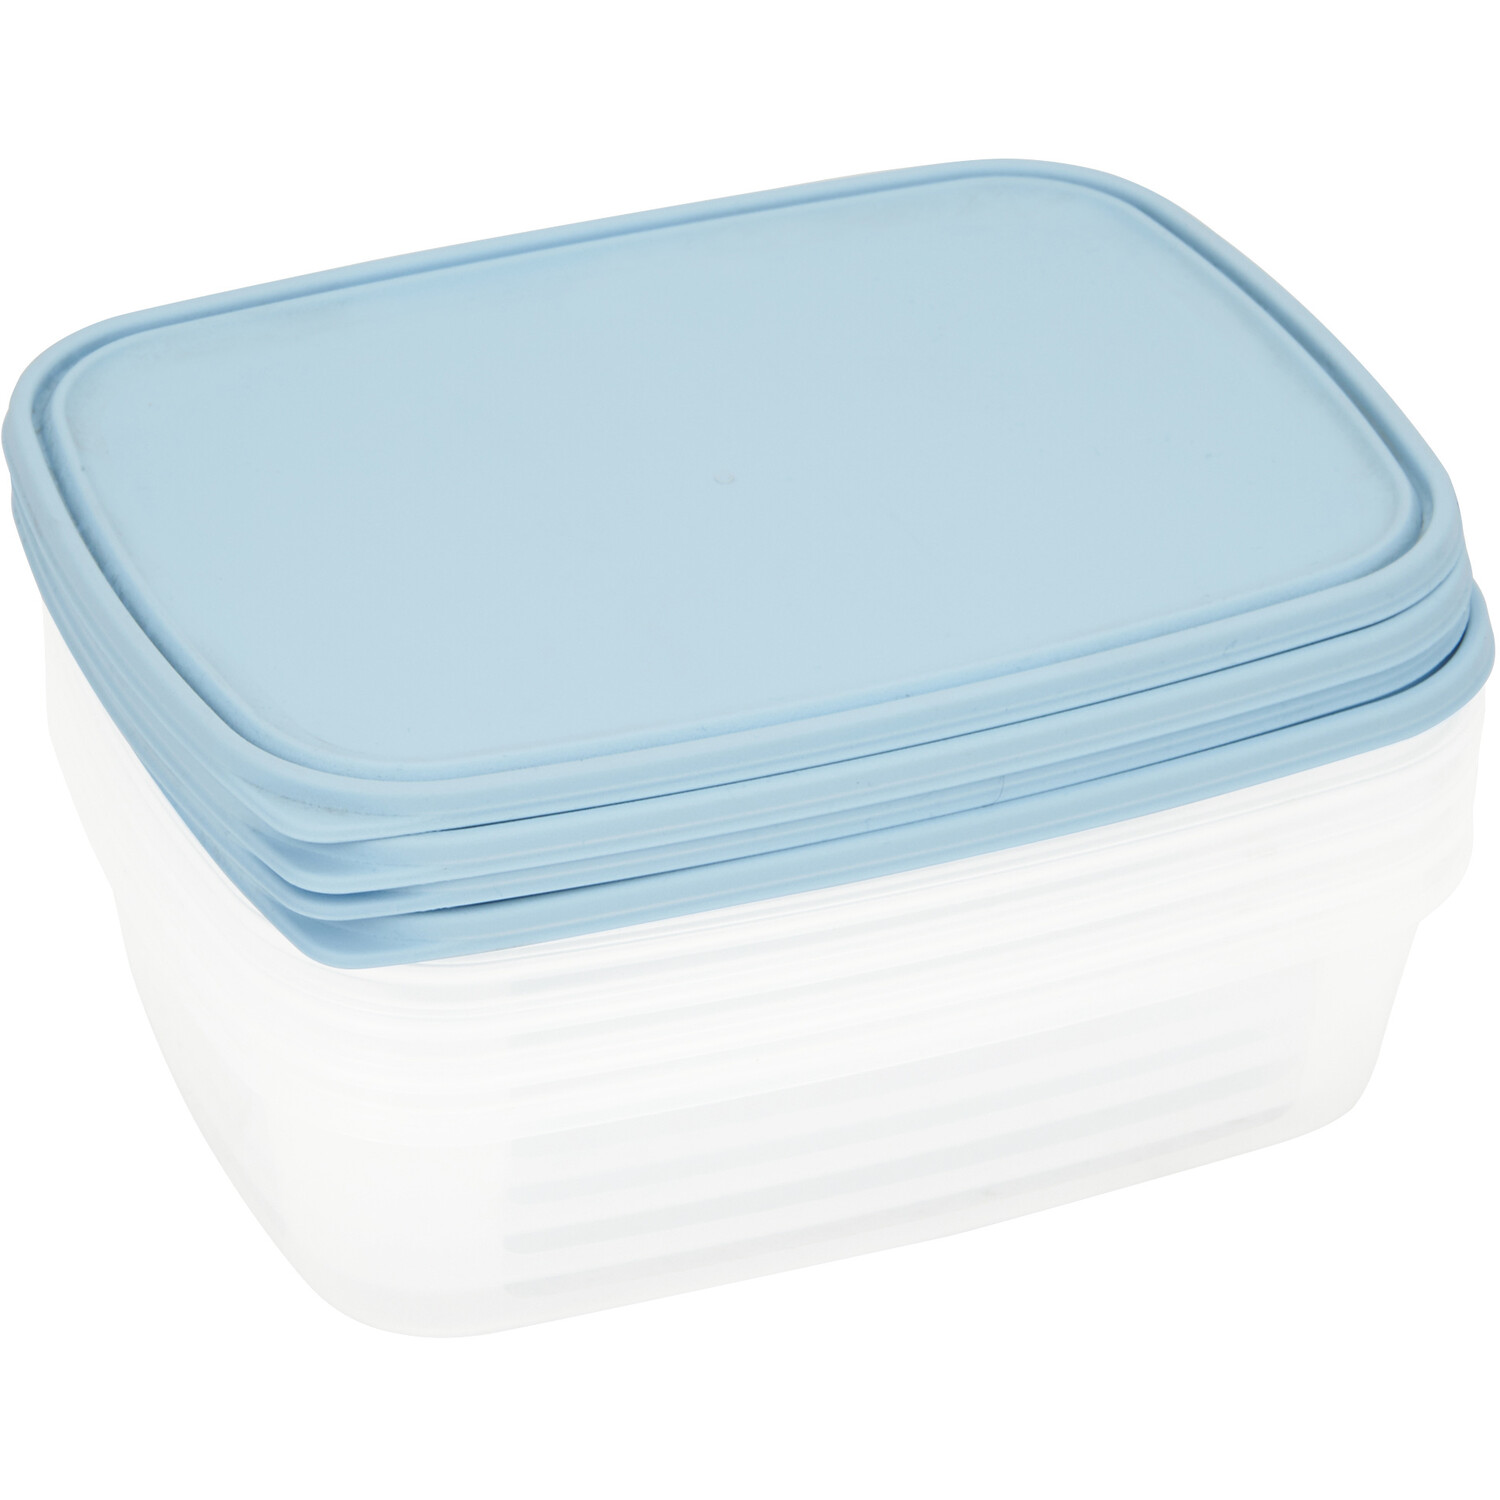 Set of 4 Everyday Food Boxes - Clear Image 3